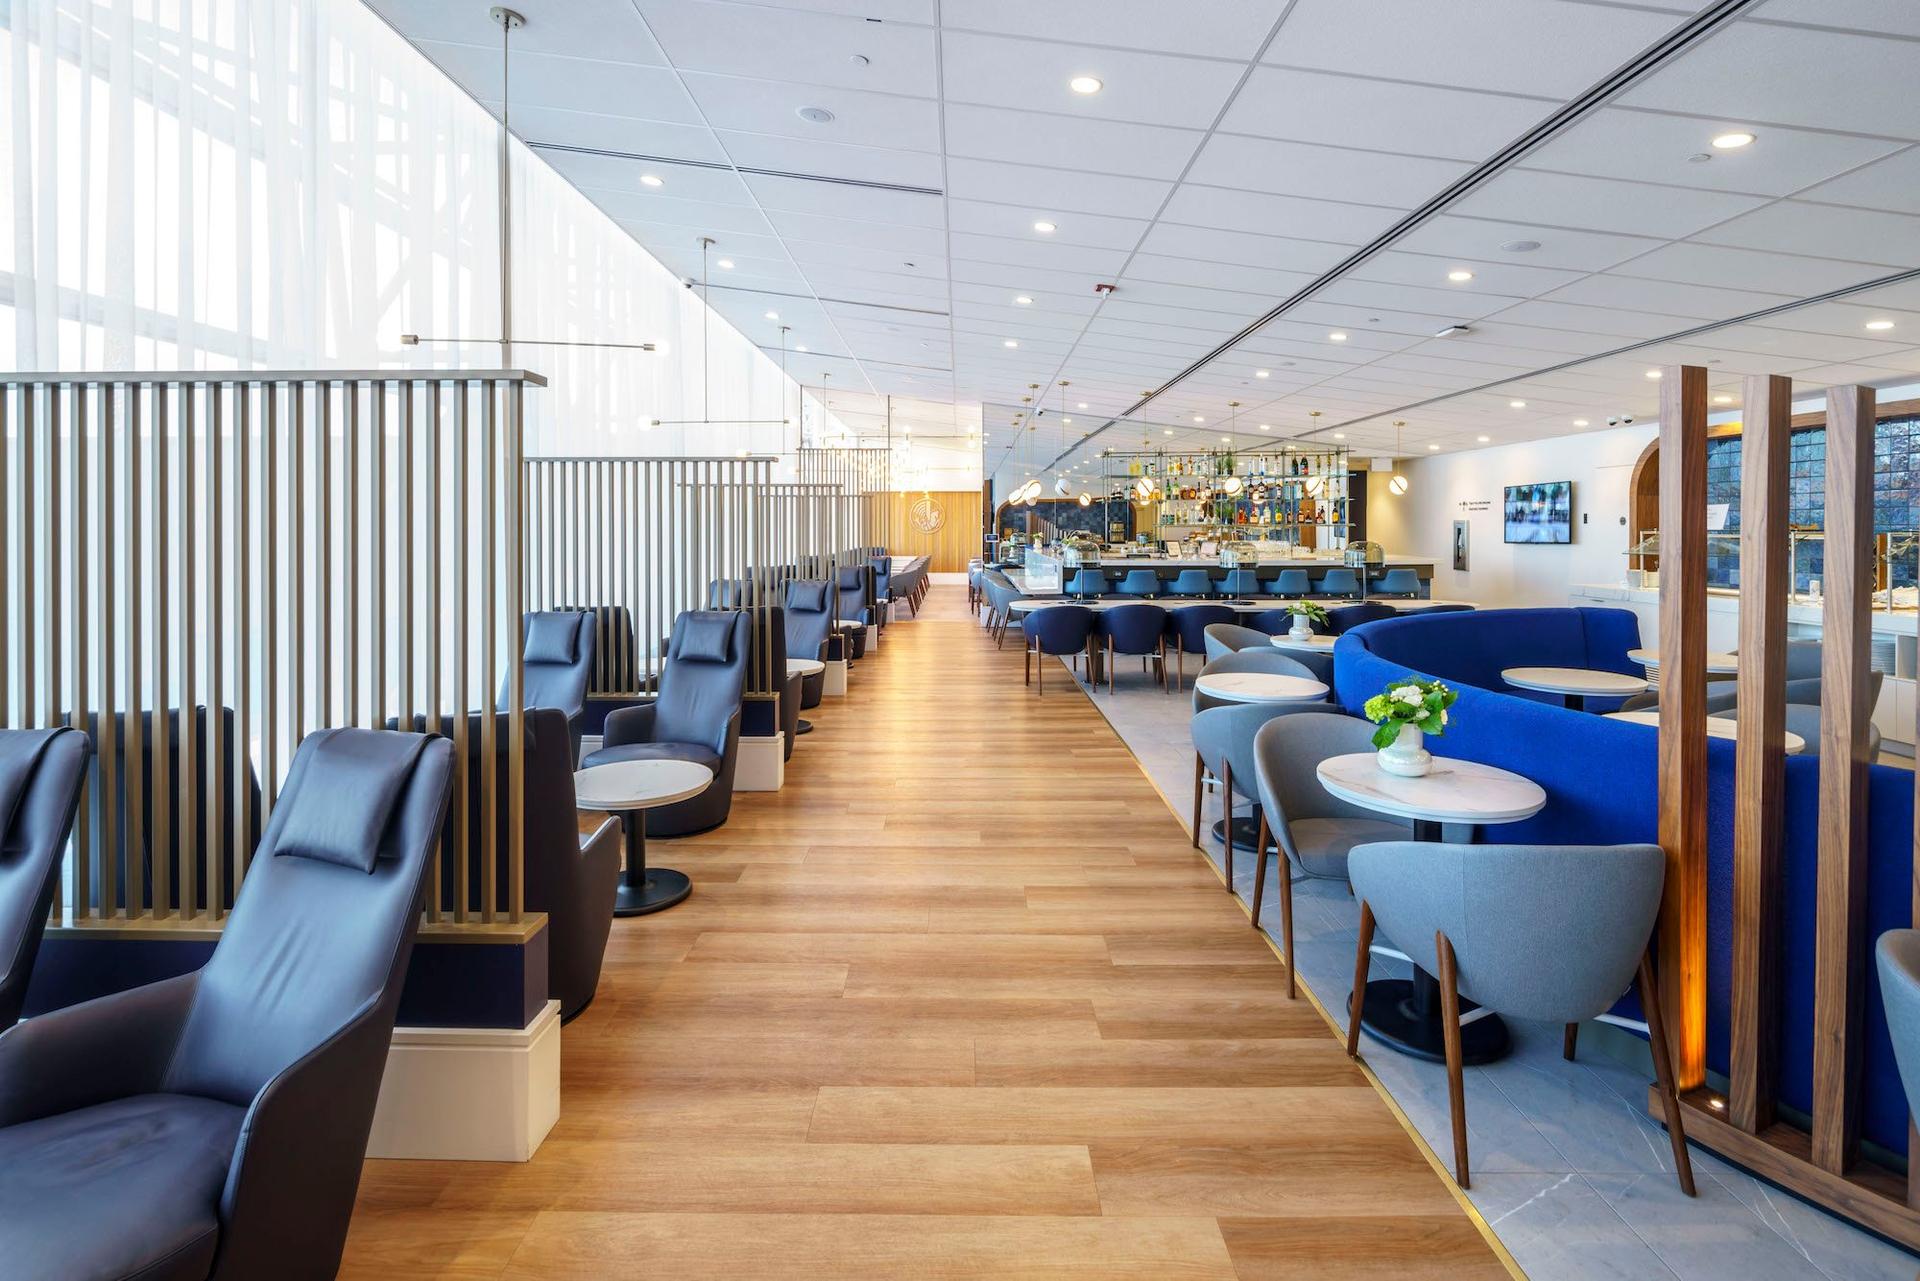 Air France/KLM Lounge operated by Plaza Premium Group image 10 of 10